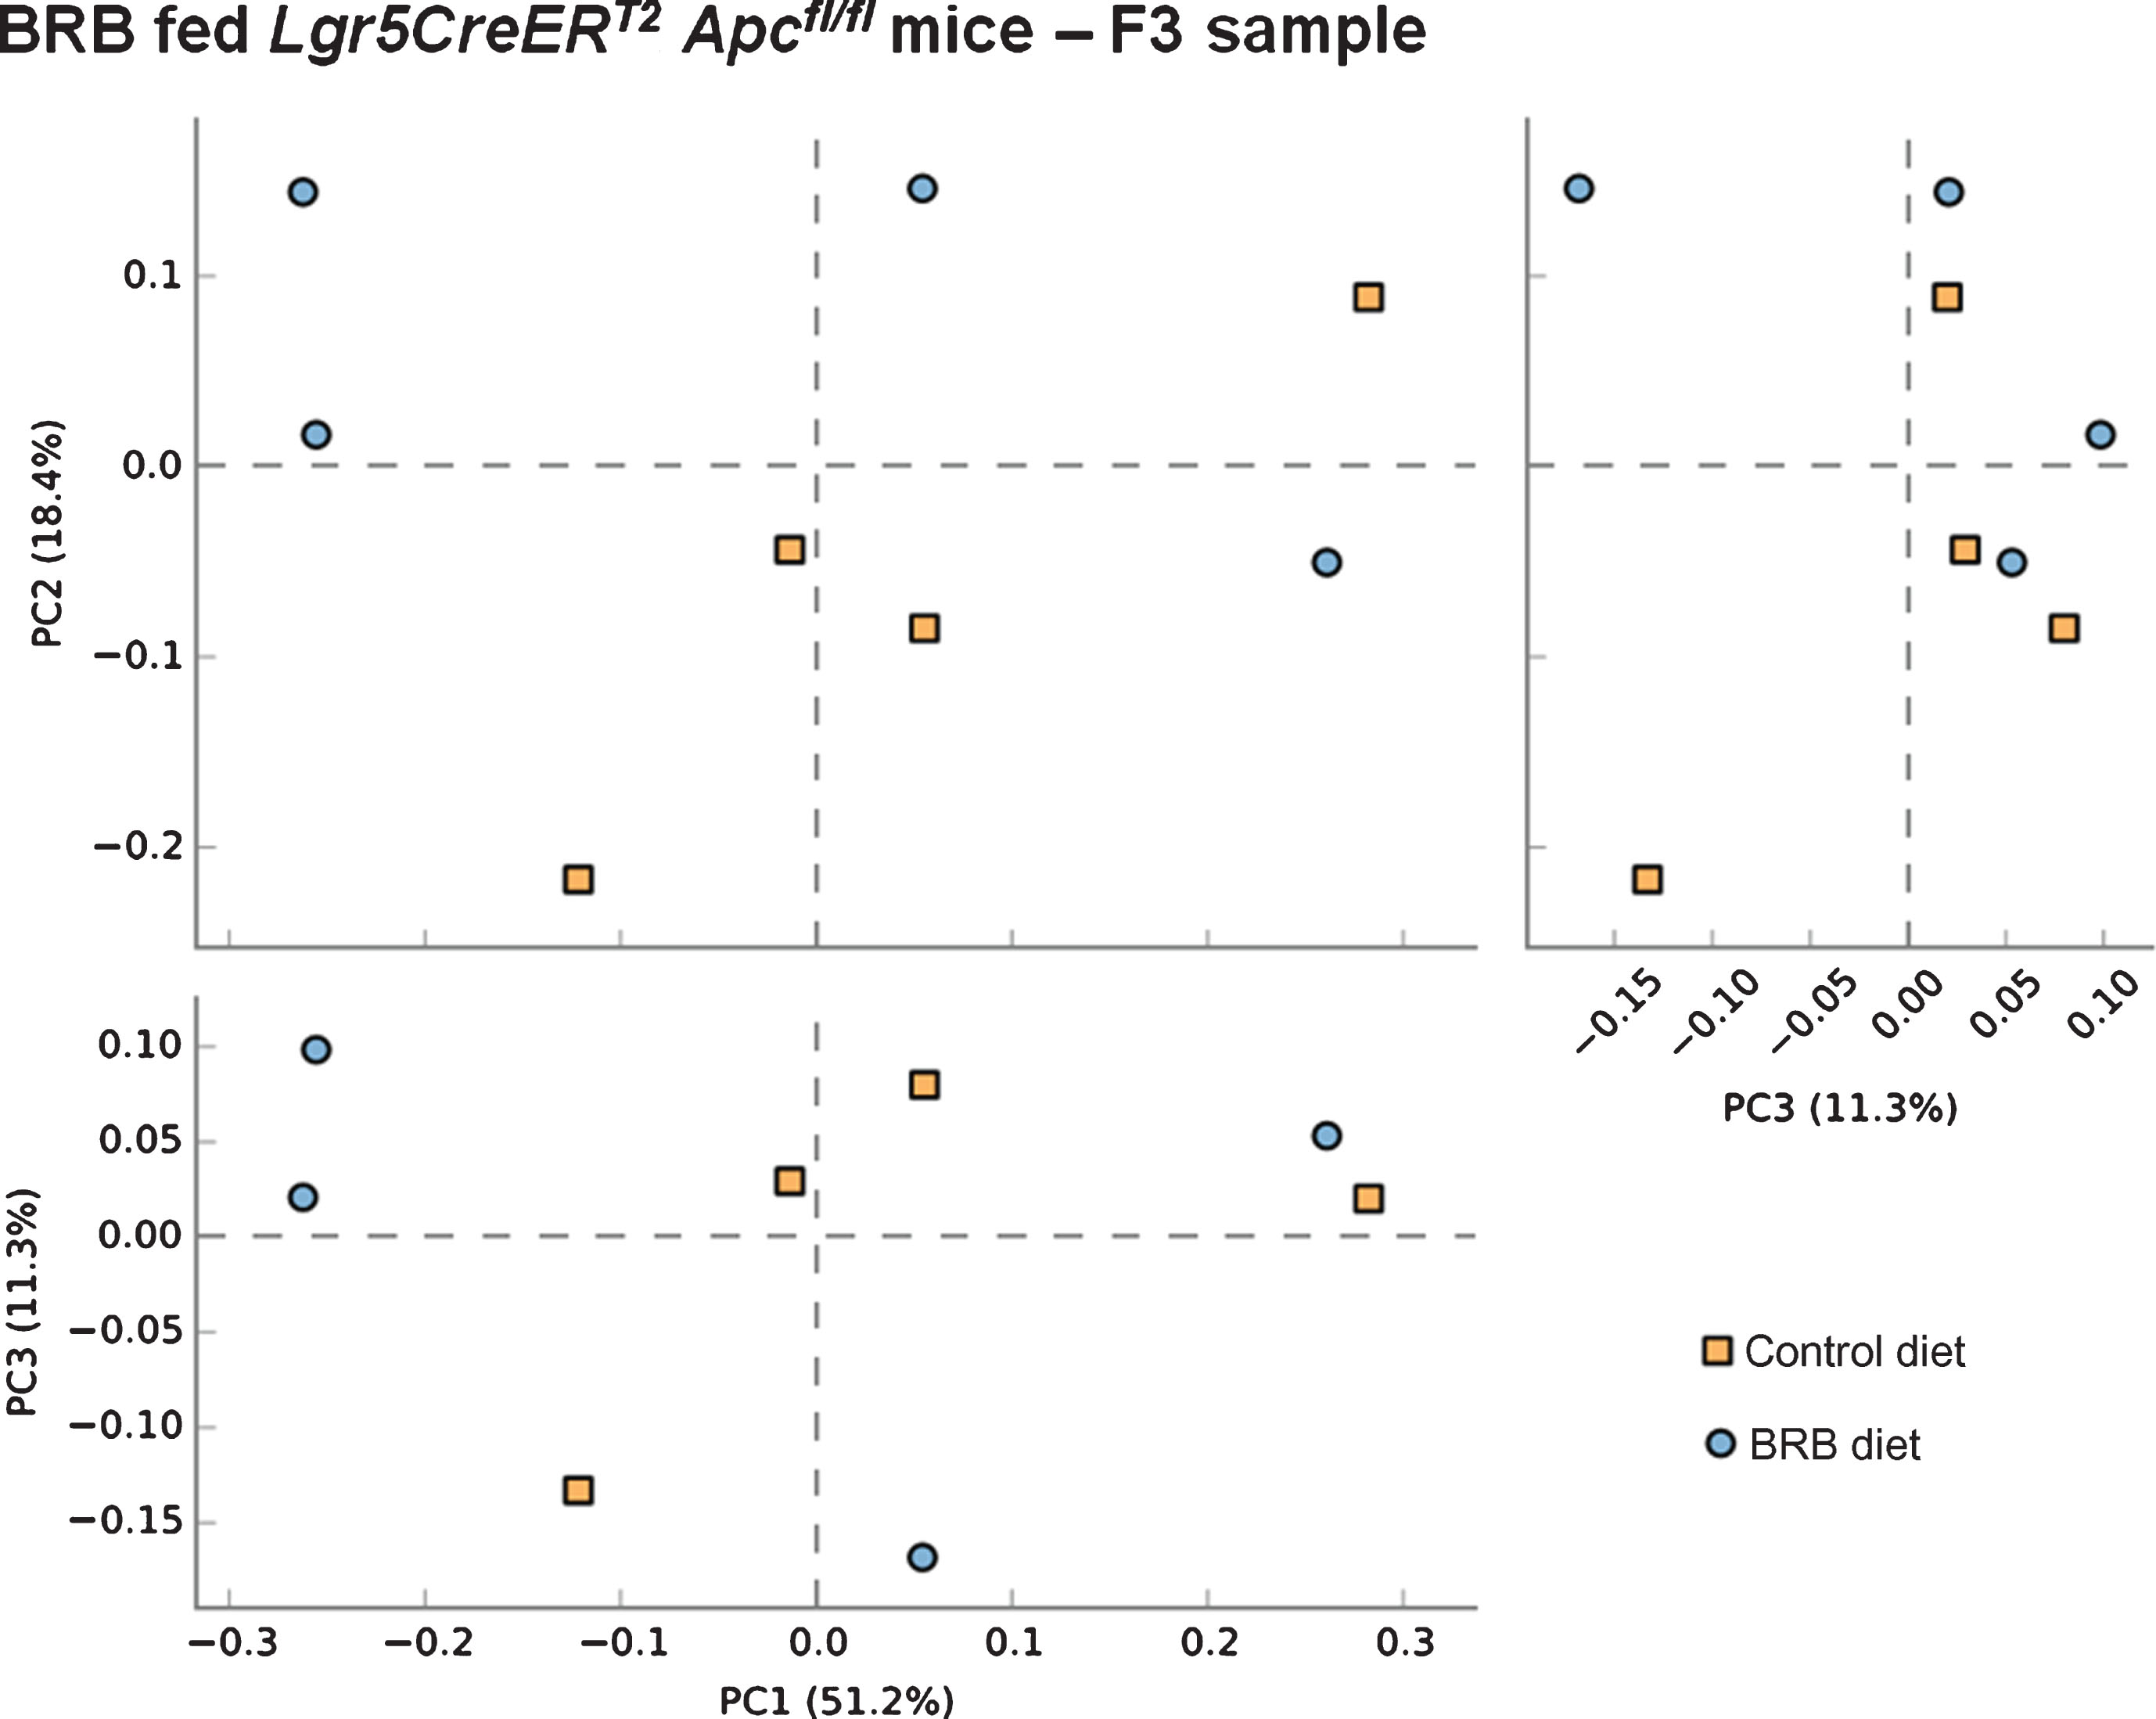 Consumption of a BRB diet does not alter microbial composition in the Lgr5CreERT2Apcfl/fl intestine 20 days post ISC Apc loss. Comparison of faecal samples taken at the F3 (; AIN-76A control diet) and F3 (; BRB diet) sampling point from the Lgr5CreERT2Apcfl/fl cohort. A PCA plot of the communities for animals fed a BRB indicating no separation of the two groups, this result was supported by PERMANOVA analysis in R. Indicating these mice were refractory to BRB induced microbiome changes. N = 4 mice per cohort.